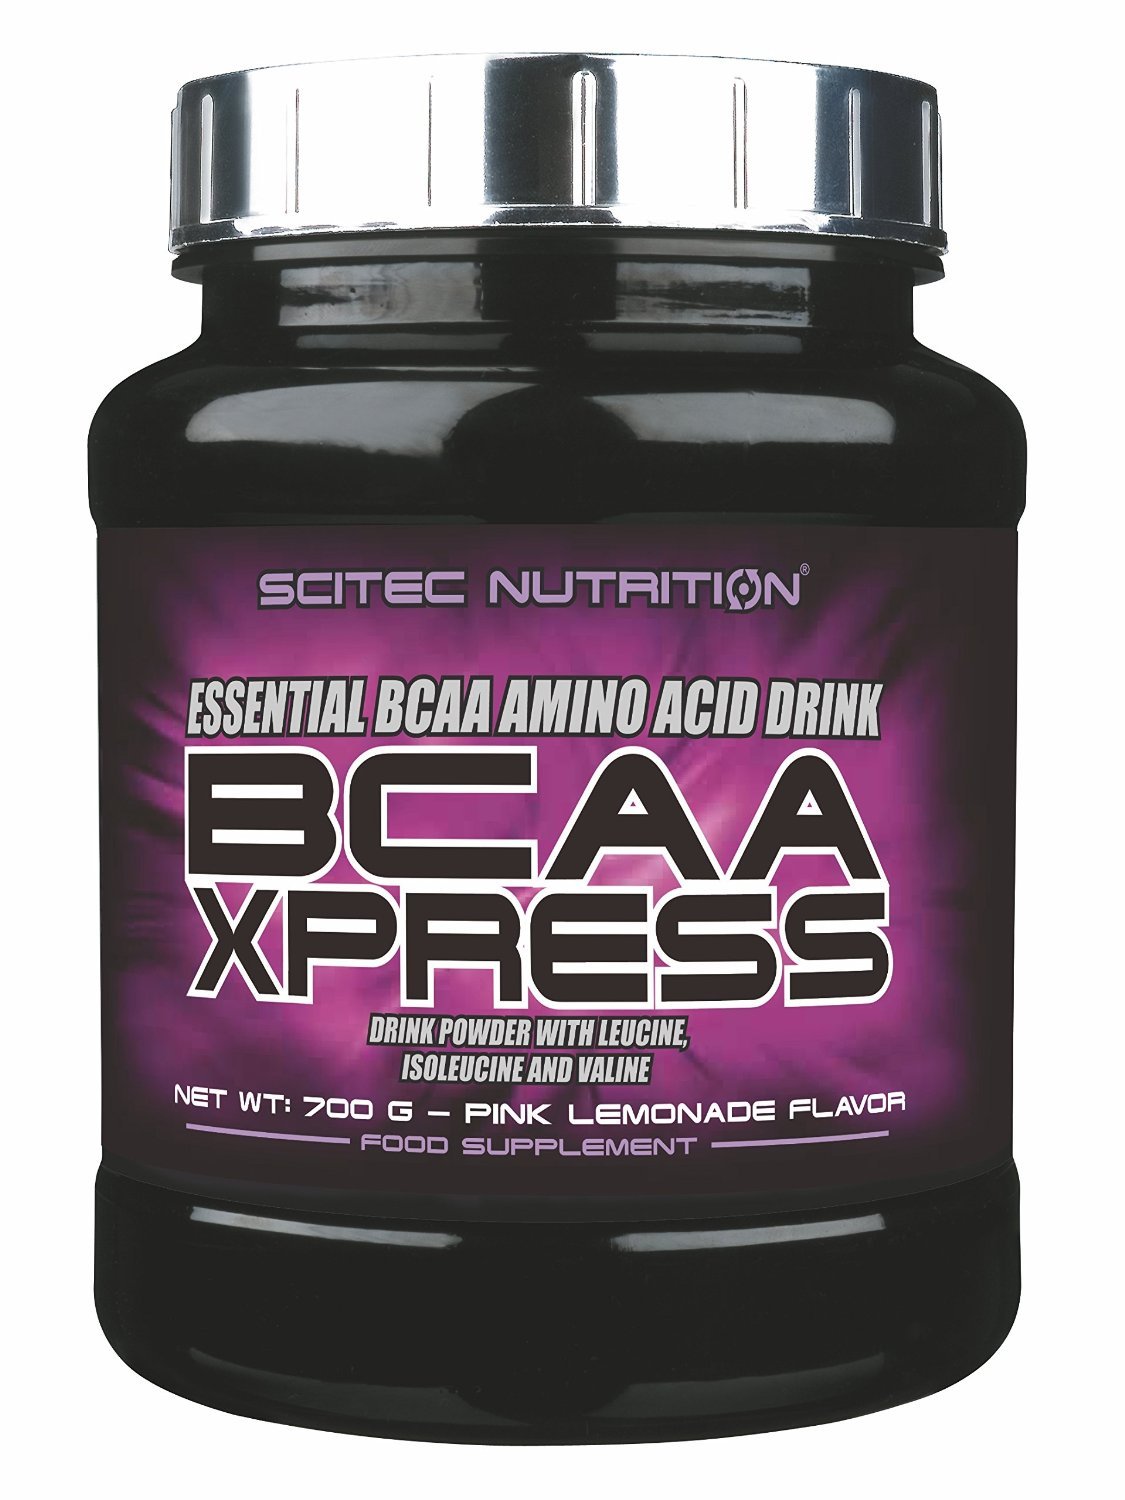 BCAA Xpress, 700 g, Scitec Nutrition. BCAA. Weight Loss recovery Anti-catabolic properties Lean muscle mass 